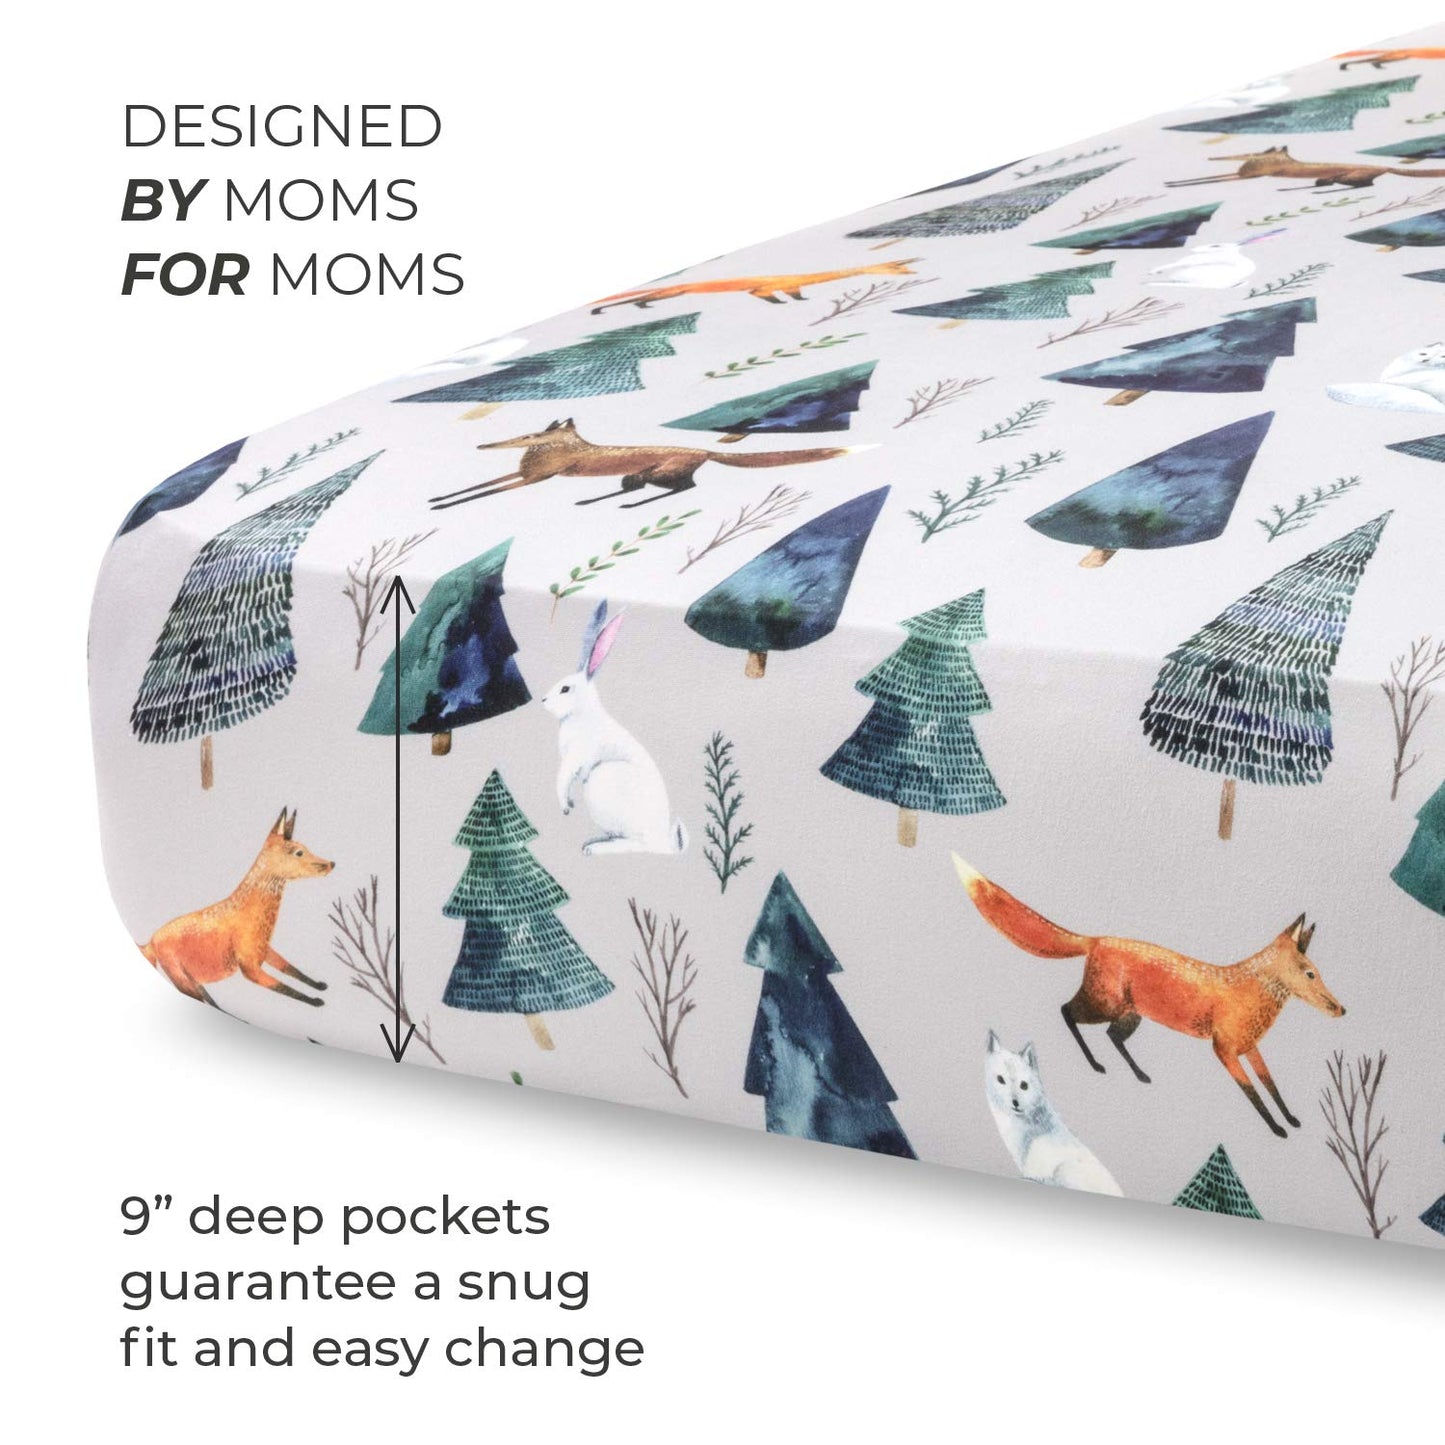 Pobi Baby - 2 Pack Premium Quality Changing Pad Cover - Ultra-Soft Cotton Blend, Stylish Animal Woodland Pattern, Safe and Snug for Baby (Magical)